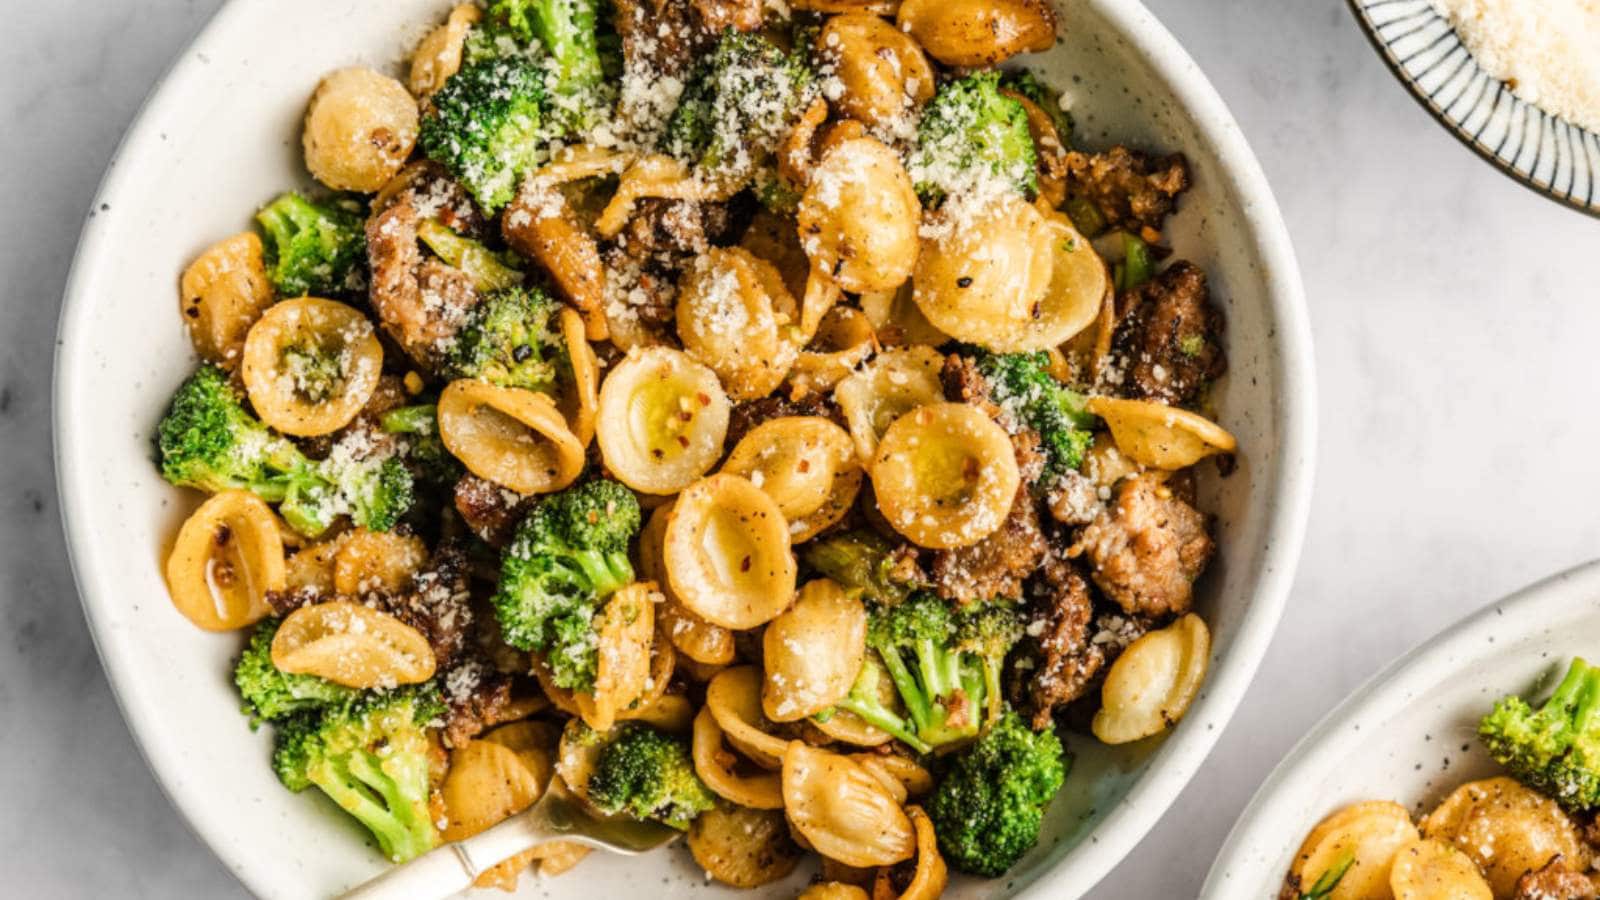 Orecchiette With Sausage and Broccoli recipe by My Every Day Table.